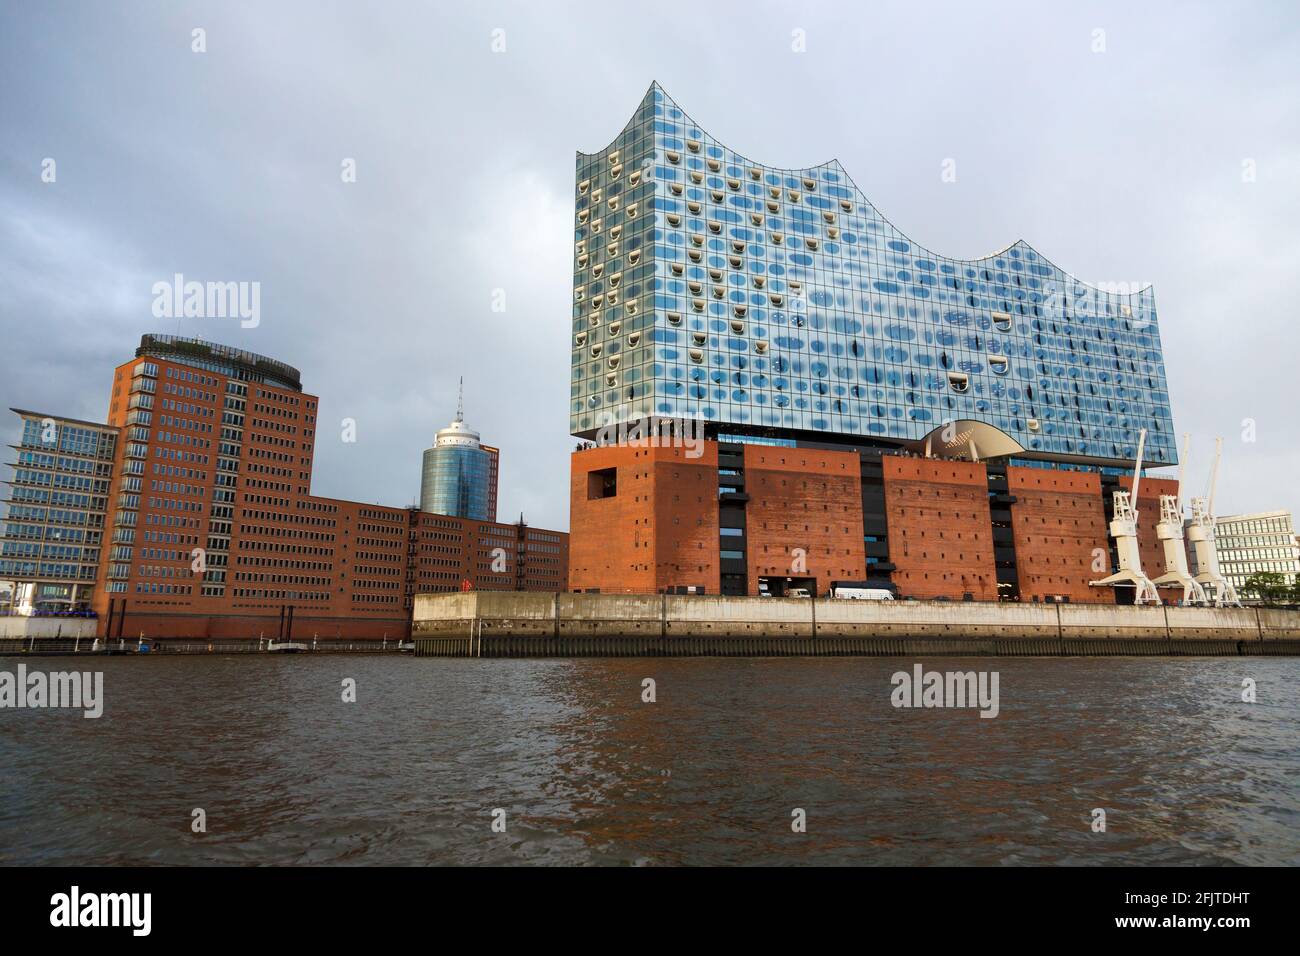 Elbe Philharmonic Hall in a cloudy day from the river. Stock Photo